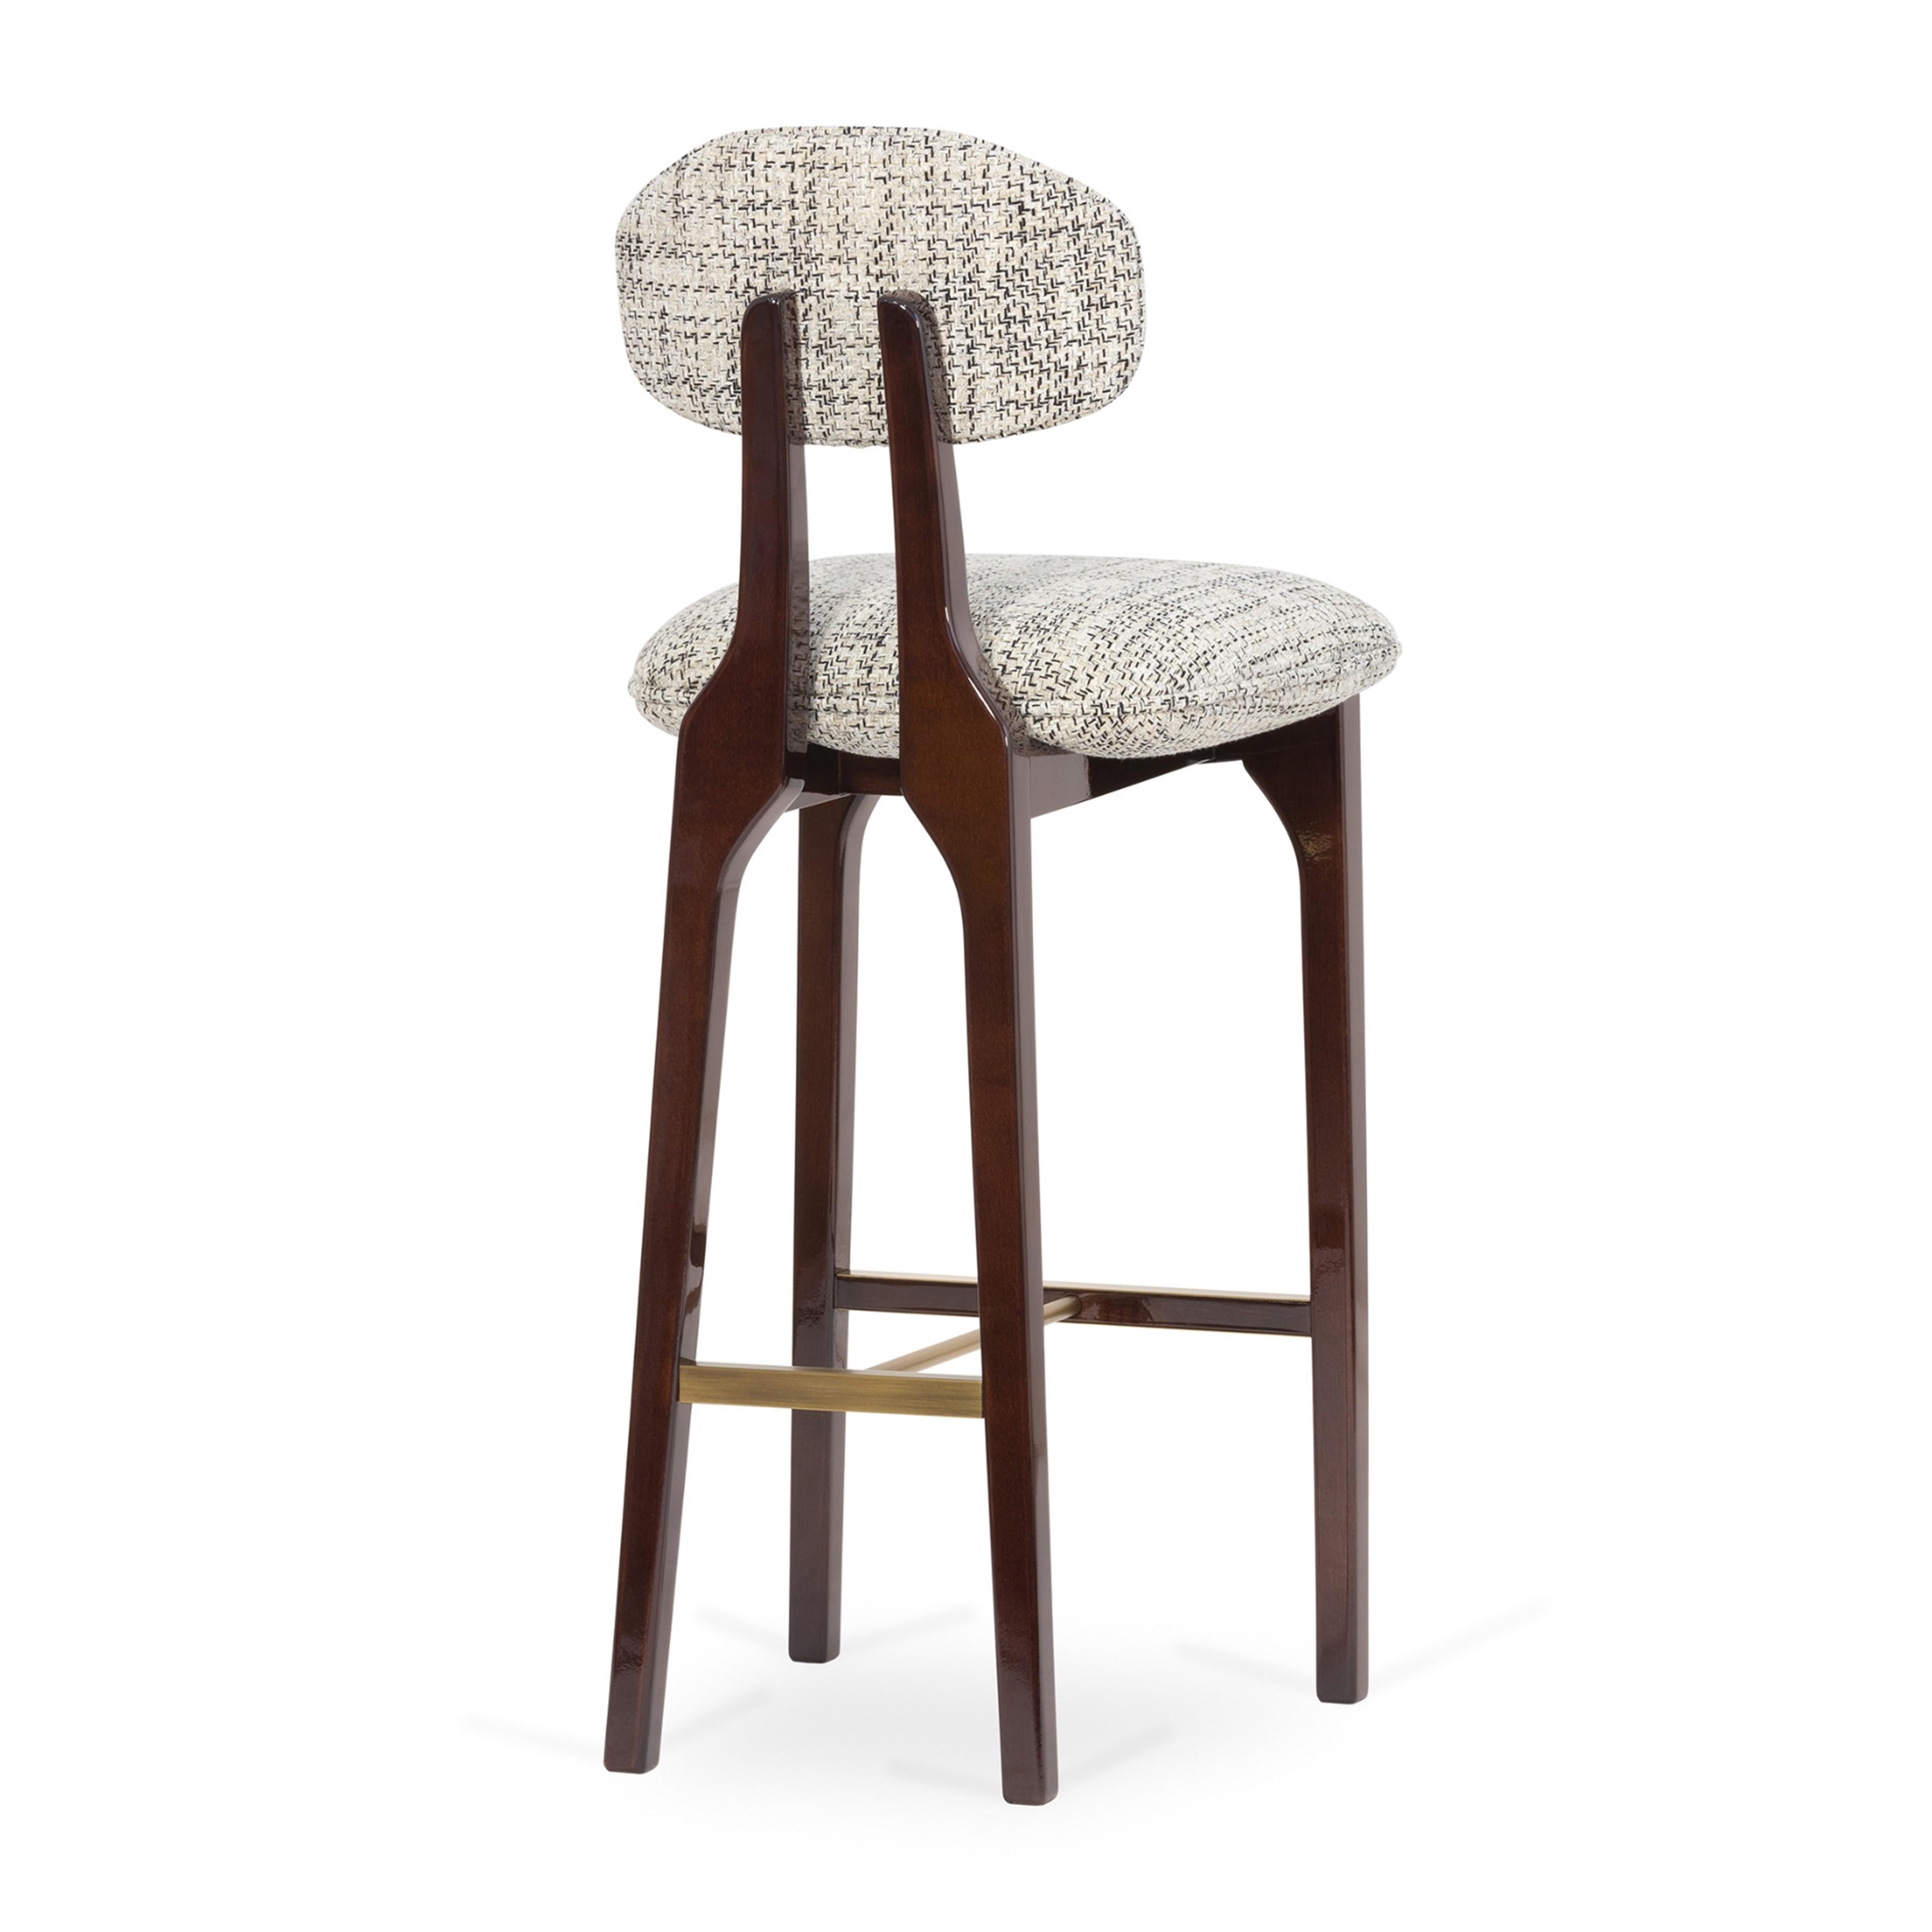 Silhouette is a surreal reminiscence of a woman’s sensual curves that arise designed in an eye catching bar stool.

The joint dimension of people and objects strongly influenced the Silhouette bar stool, whose elegant wooden structure uncovers